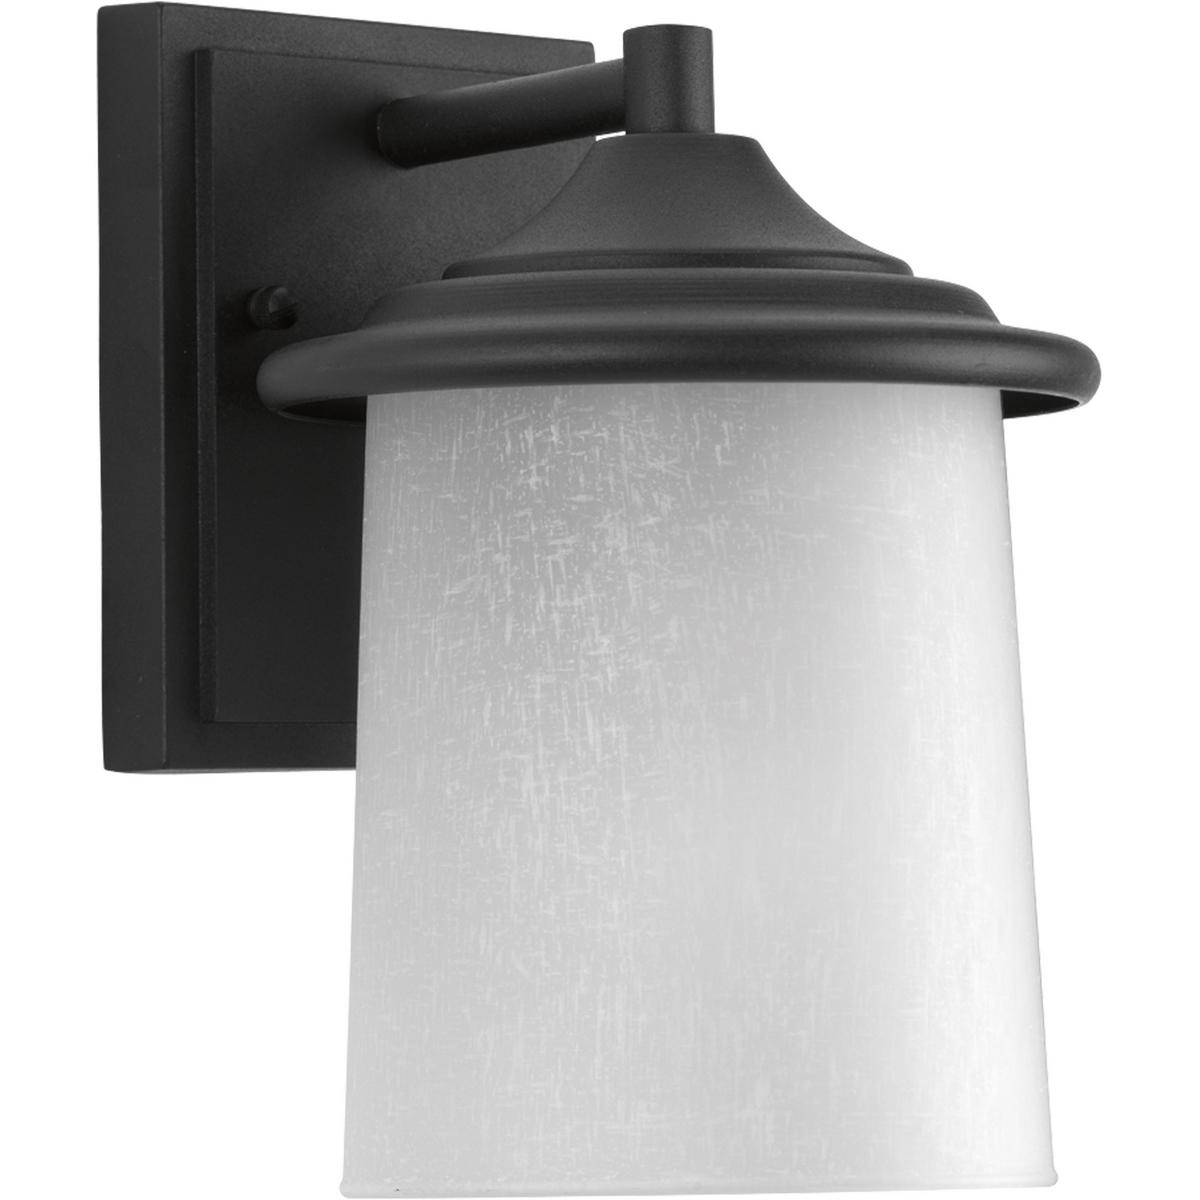 Hubbell P6059-31 Outdoor one-light small wall lantern with a white linen glass shade in a Black finish.  ; Black finish. ; White linen glass. ; Powdercoat finish.